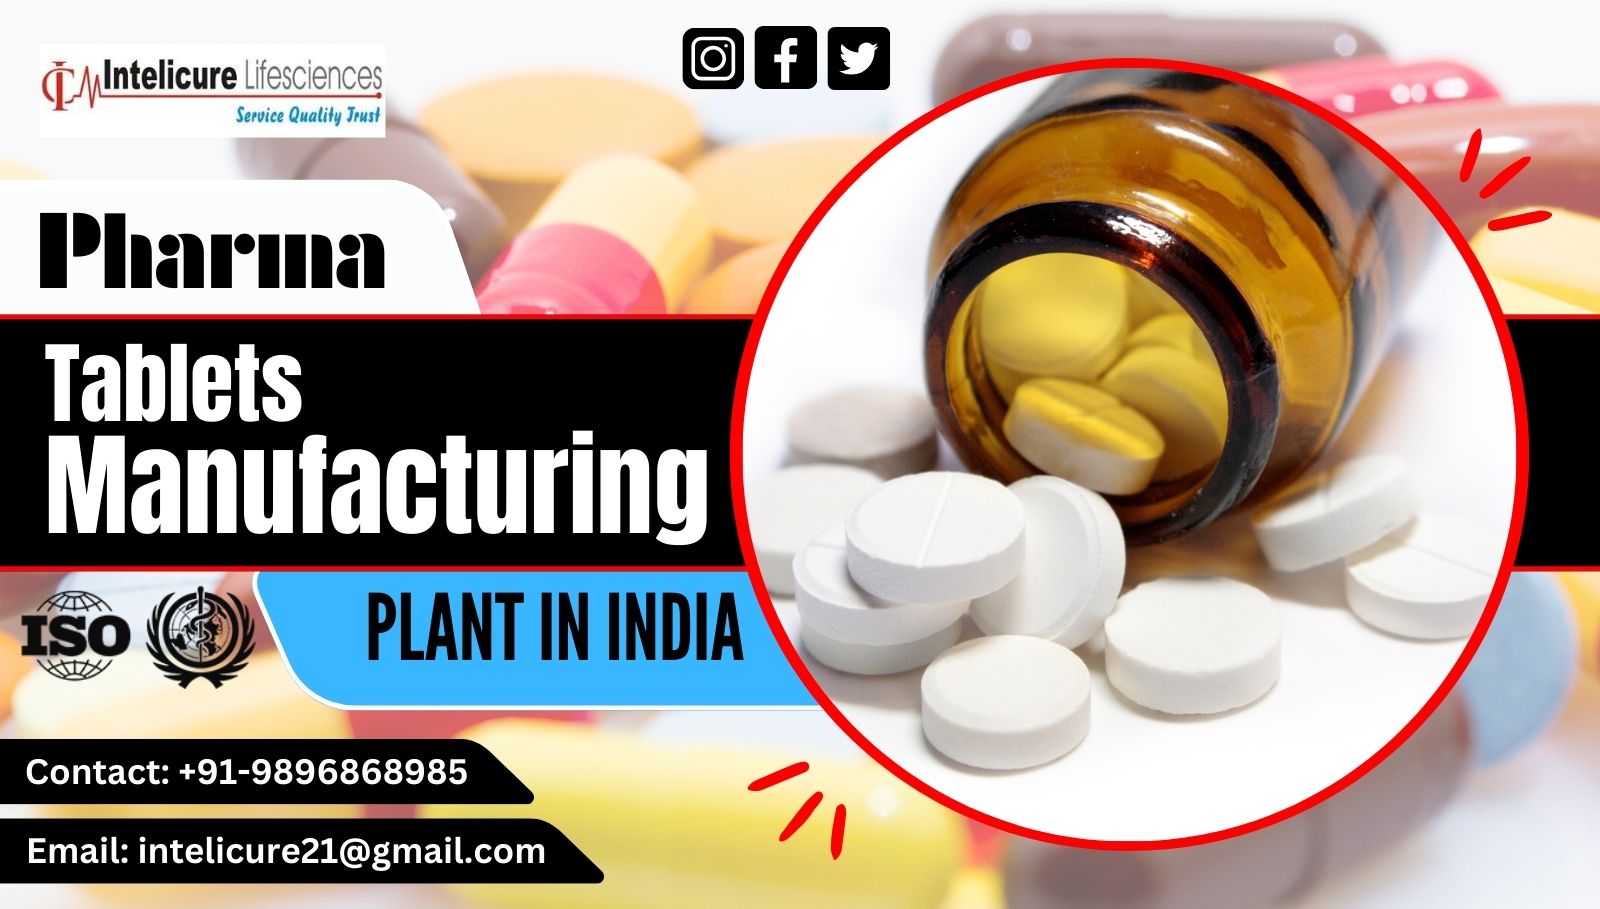 pharma tablets manufacturing plant in india